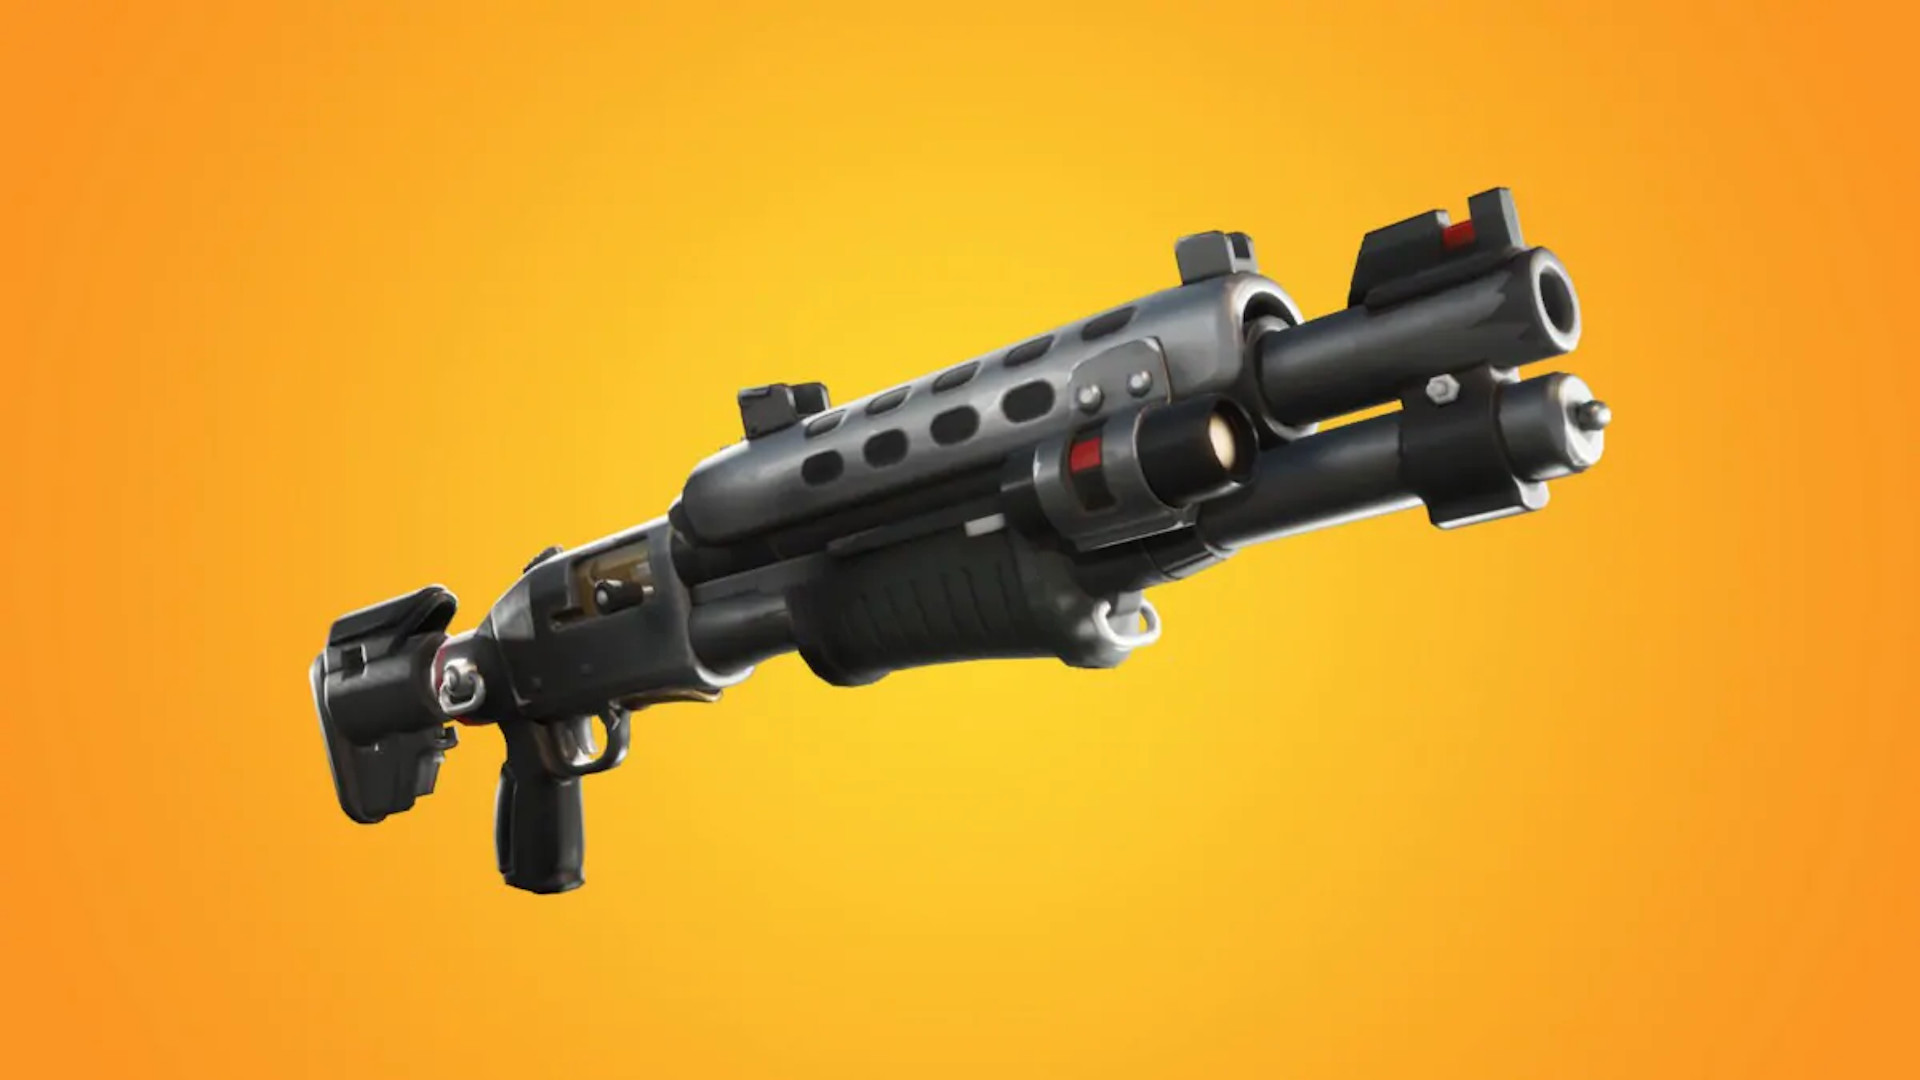 Fortnite Are Rarer Weapons More Accurate Fortnite Chapter 2 Season 7 Tier List The Best Weapons And How To Craft Them The Loadout